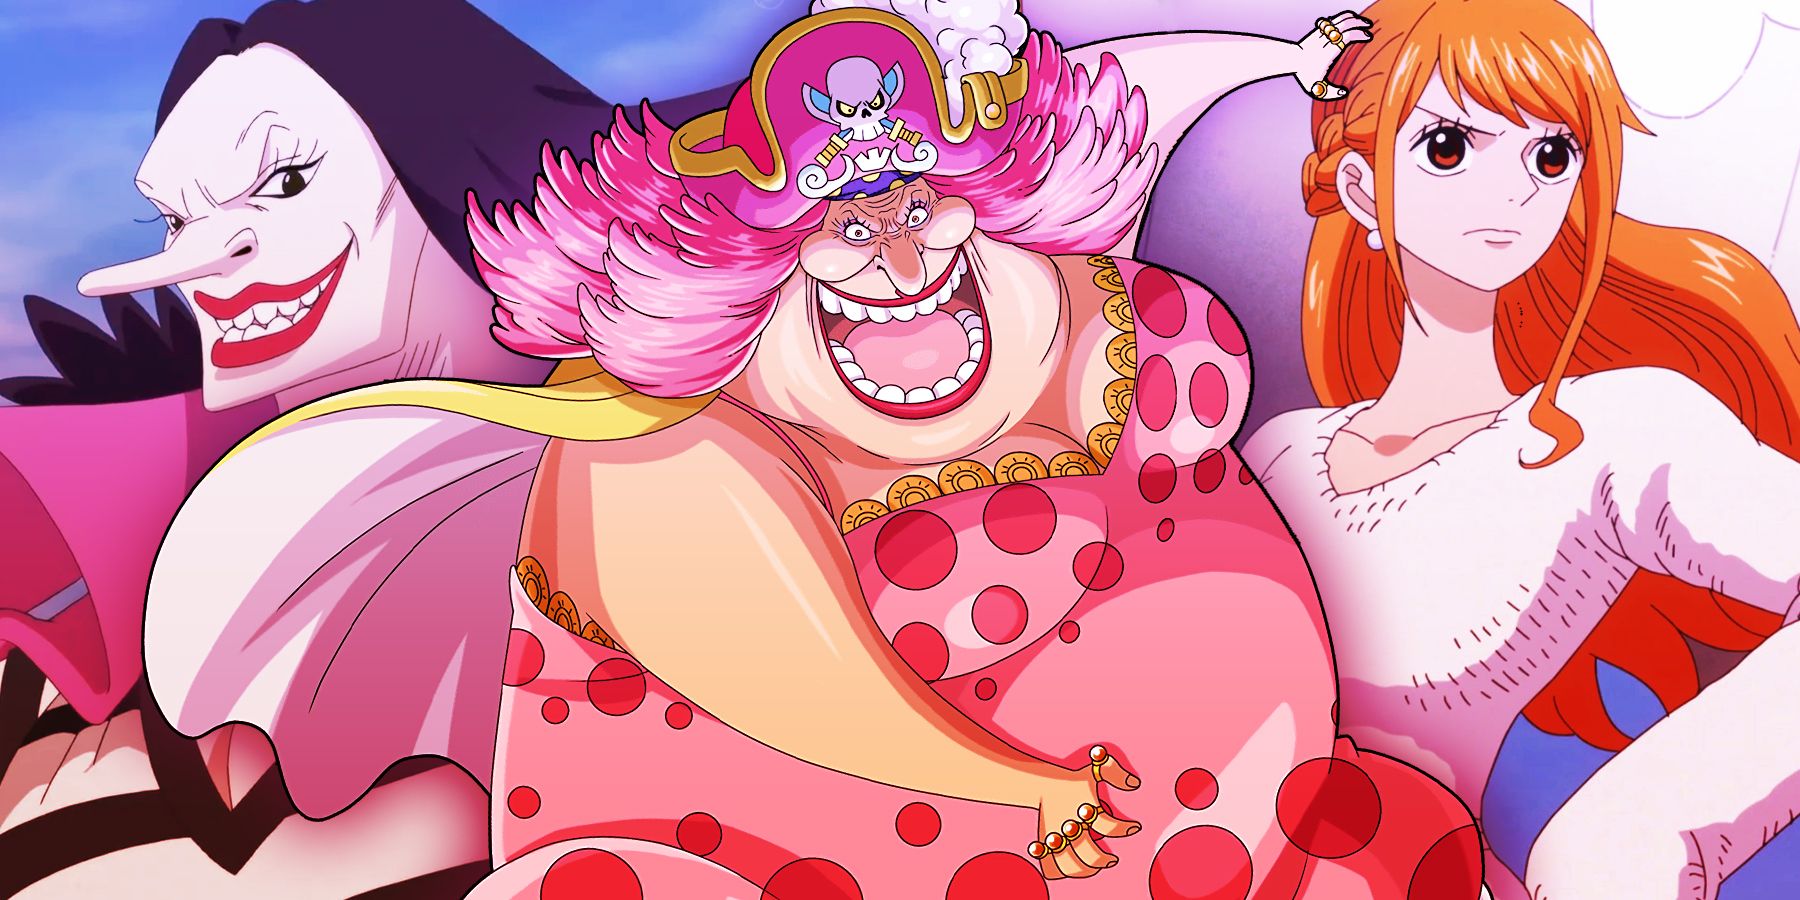 From left to right: Catarina Devon, Big Mom, and Nami.